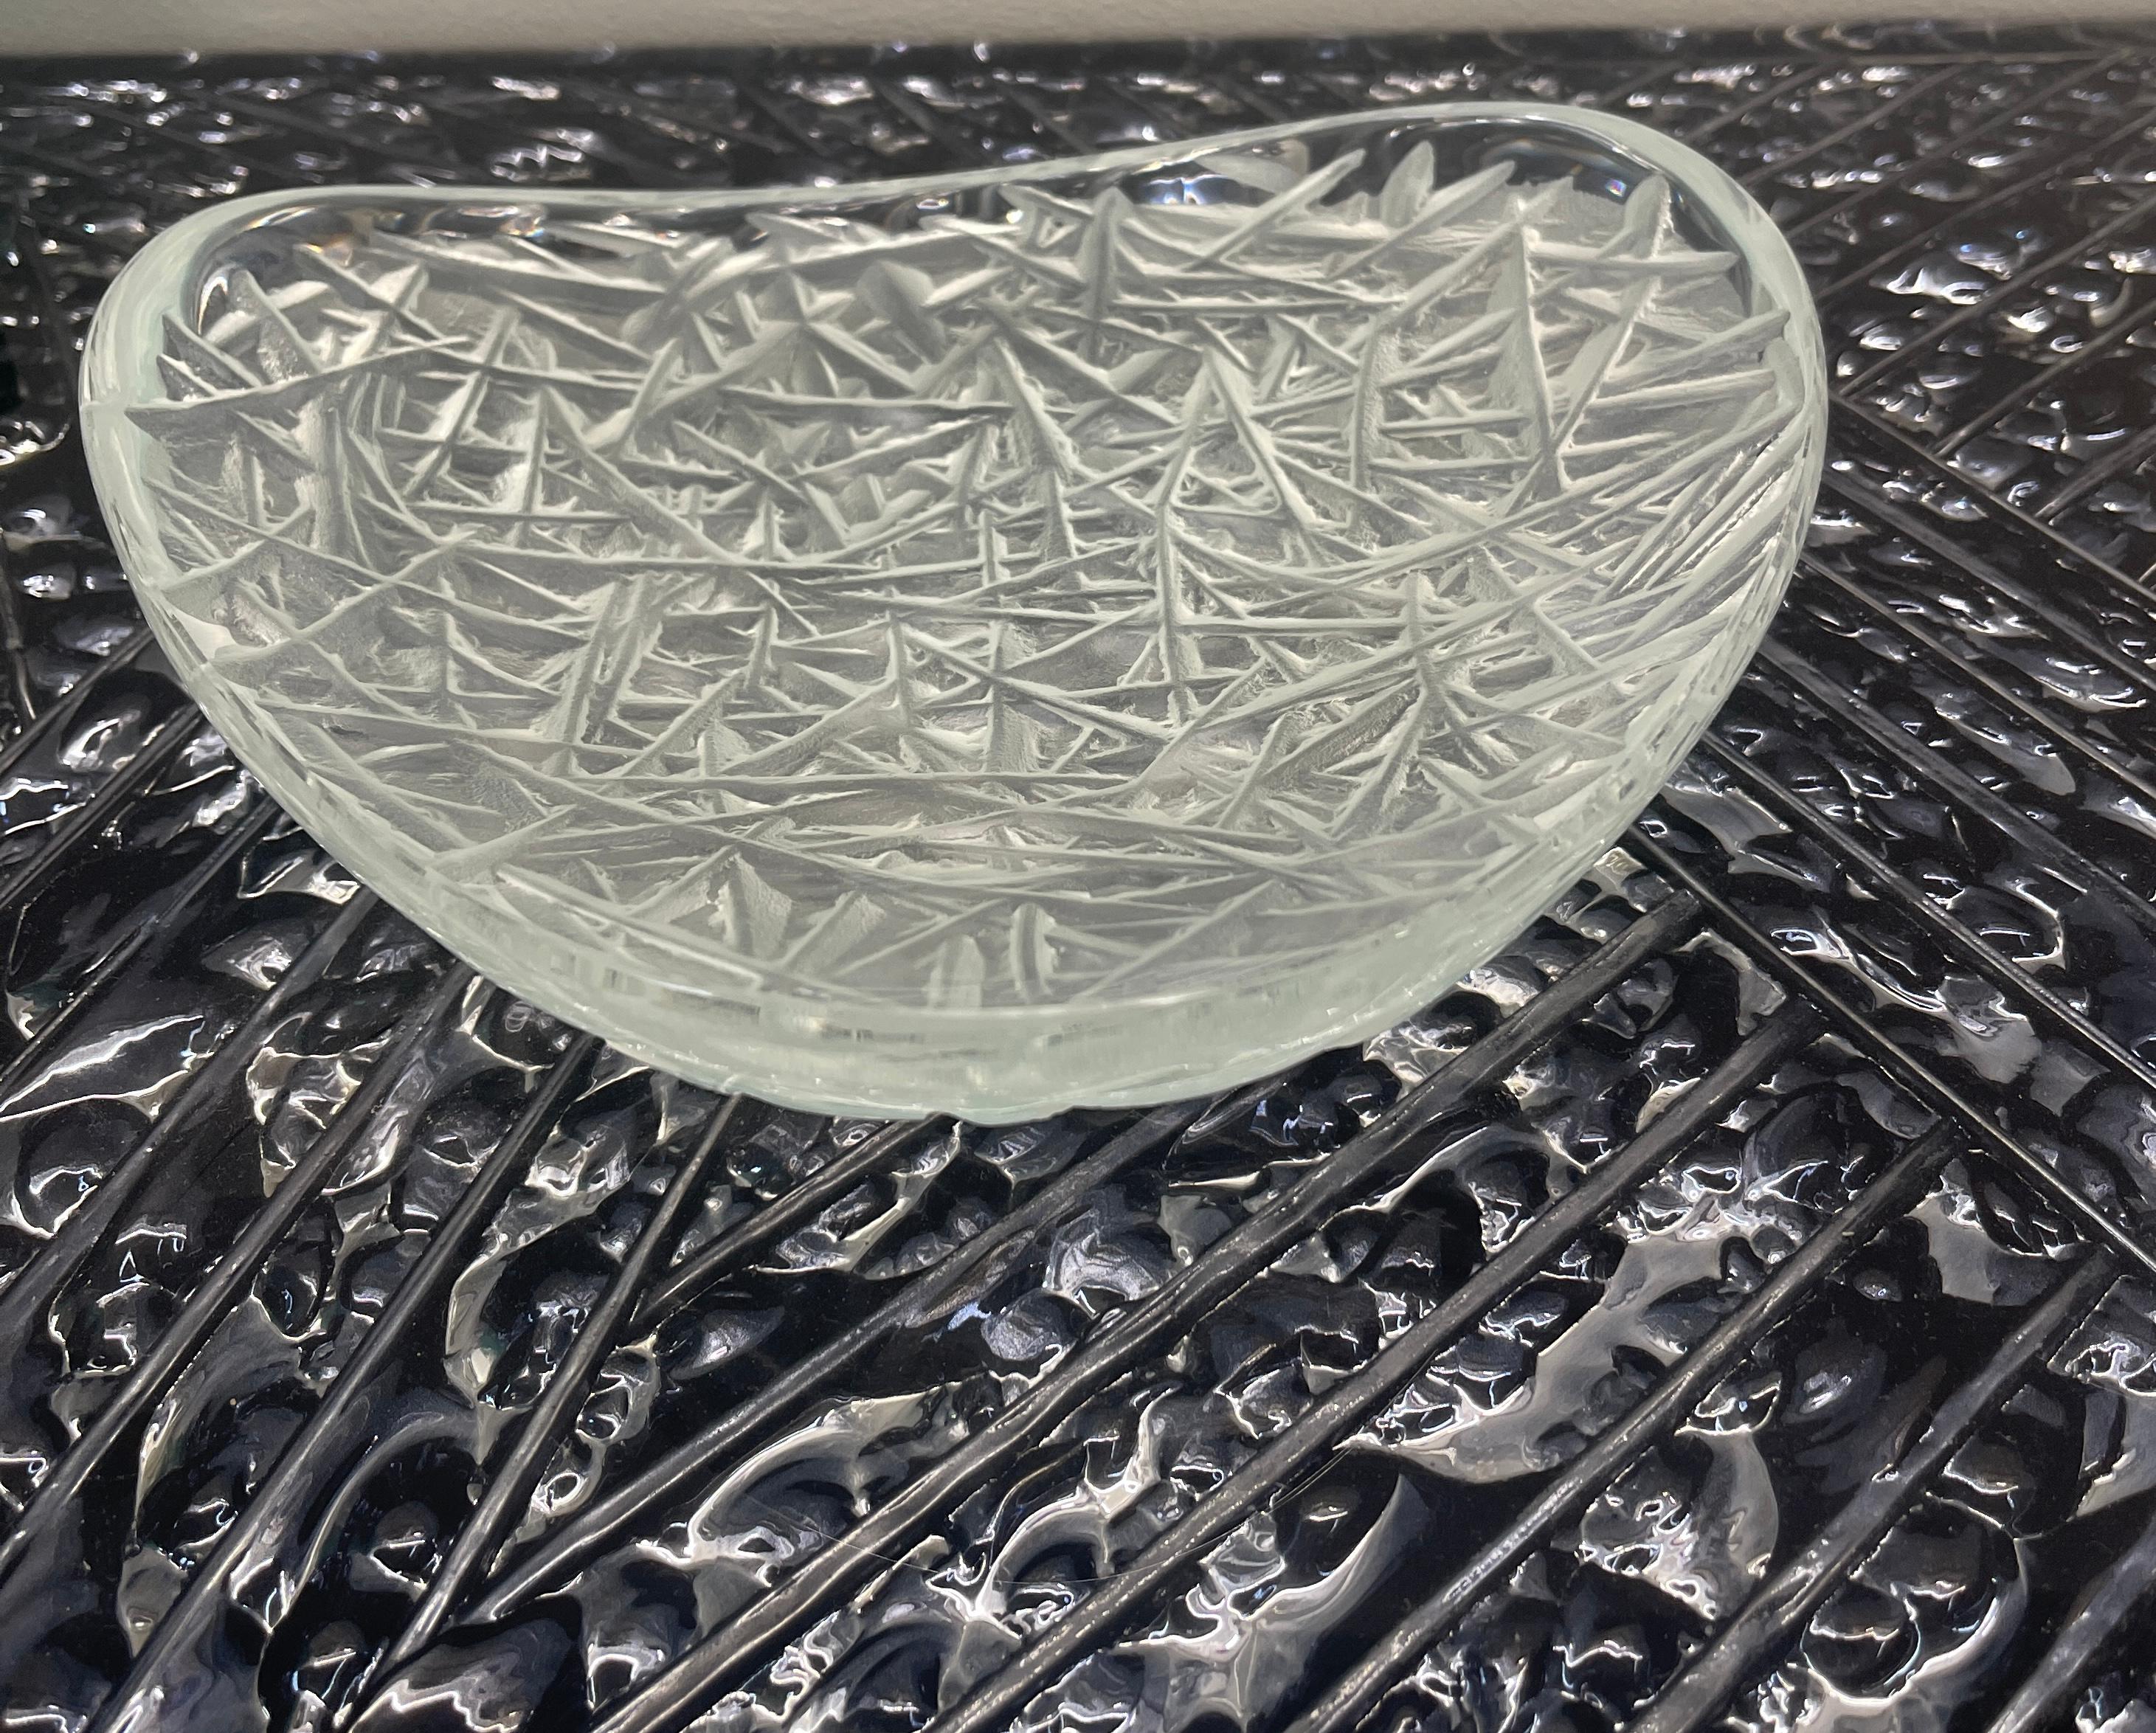 Unique Contemporary Hand-engraved Crystal Bowl by Ghiró Studio In New Condition For Sale In Pieve Emanuele, Milano